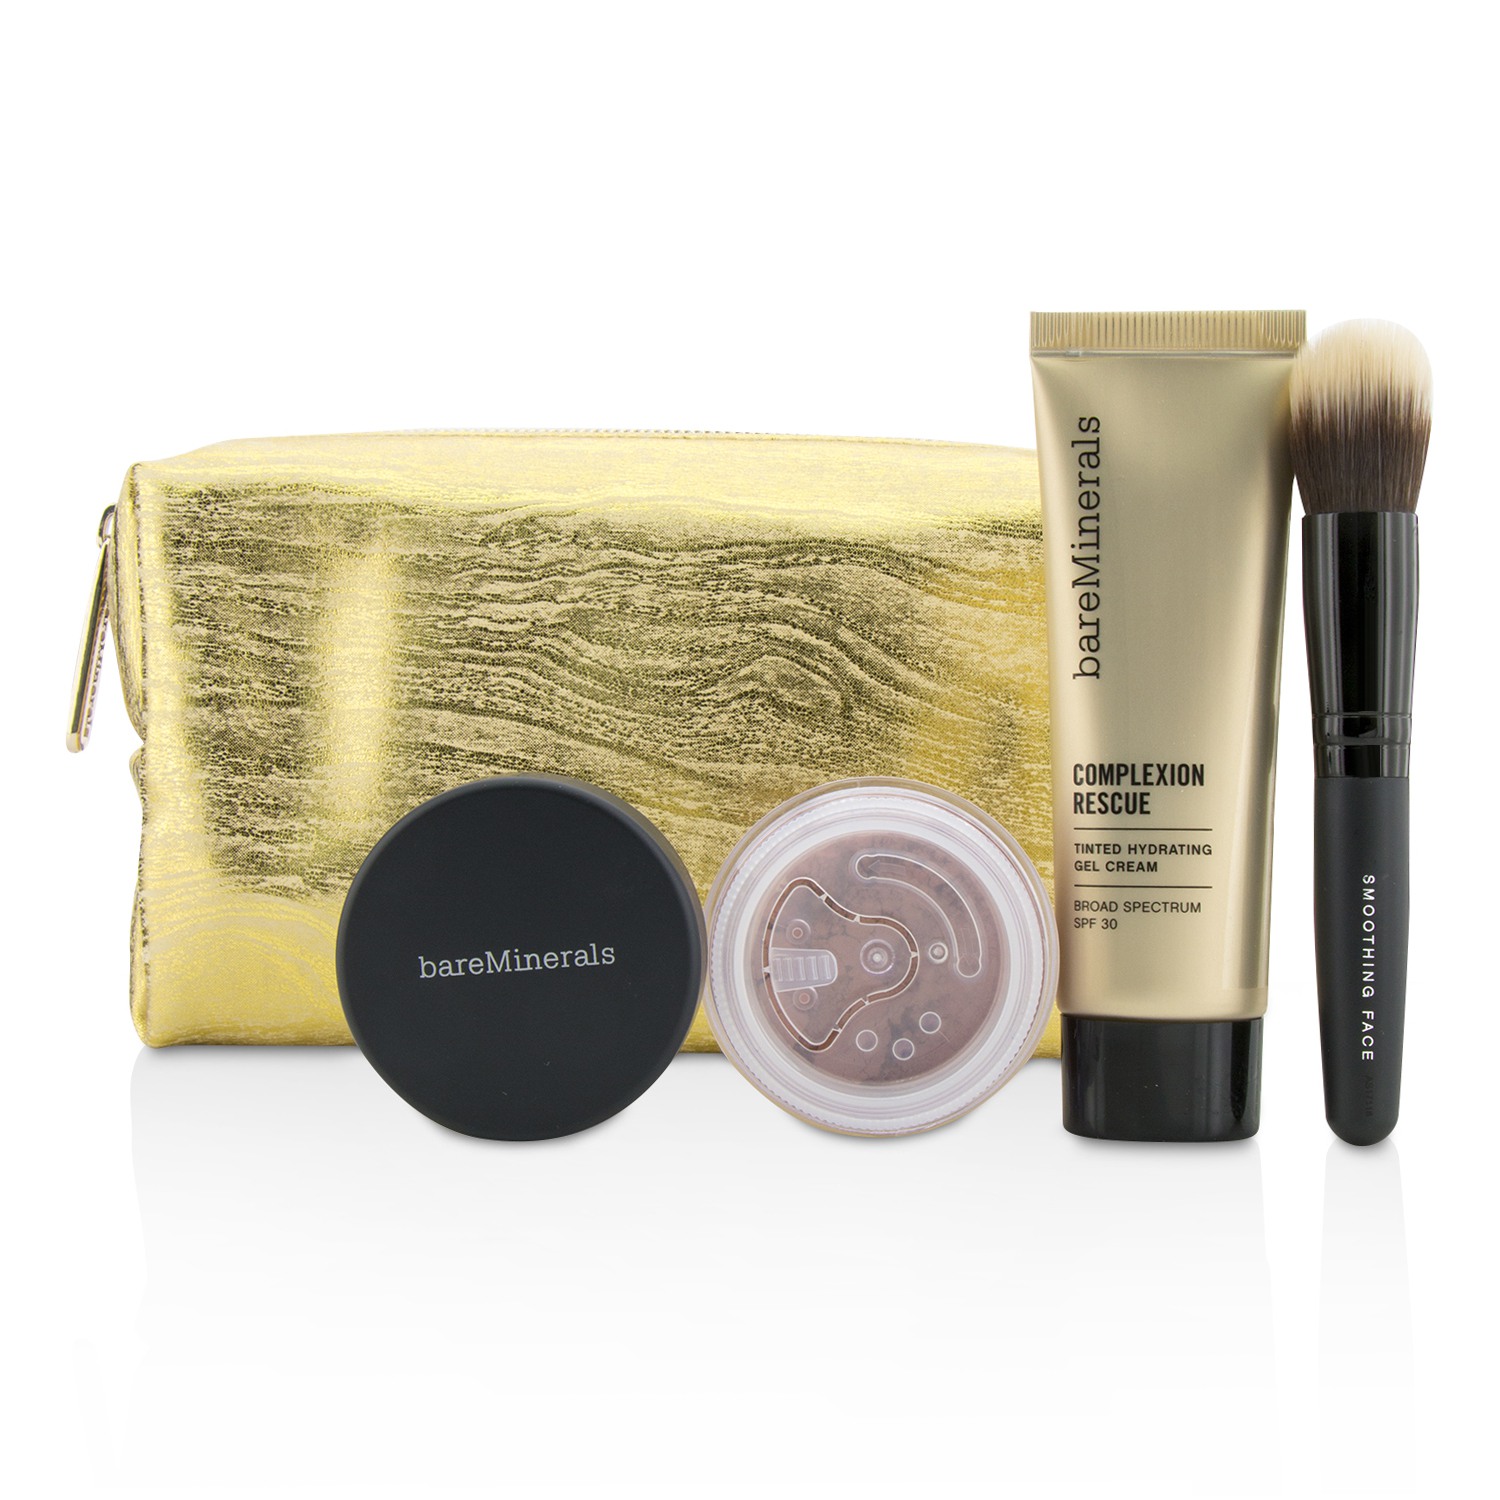 Take Me With You Complexion Rescue Try Me Set - # 01 Opal BareMinerals Image